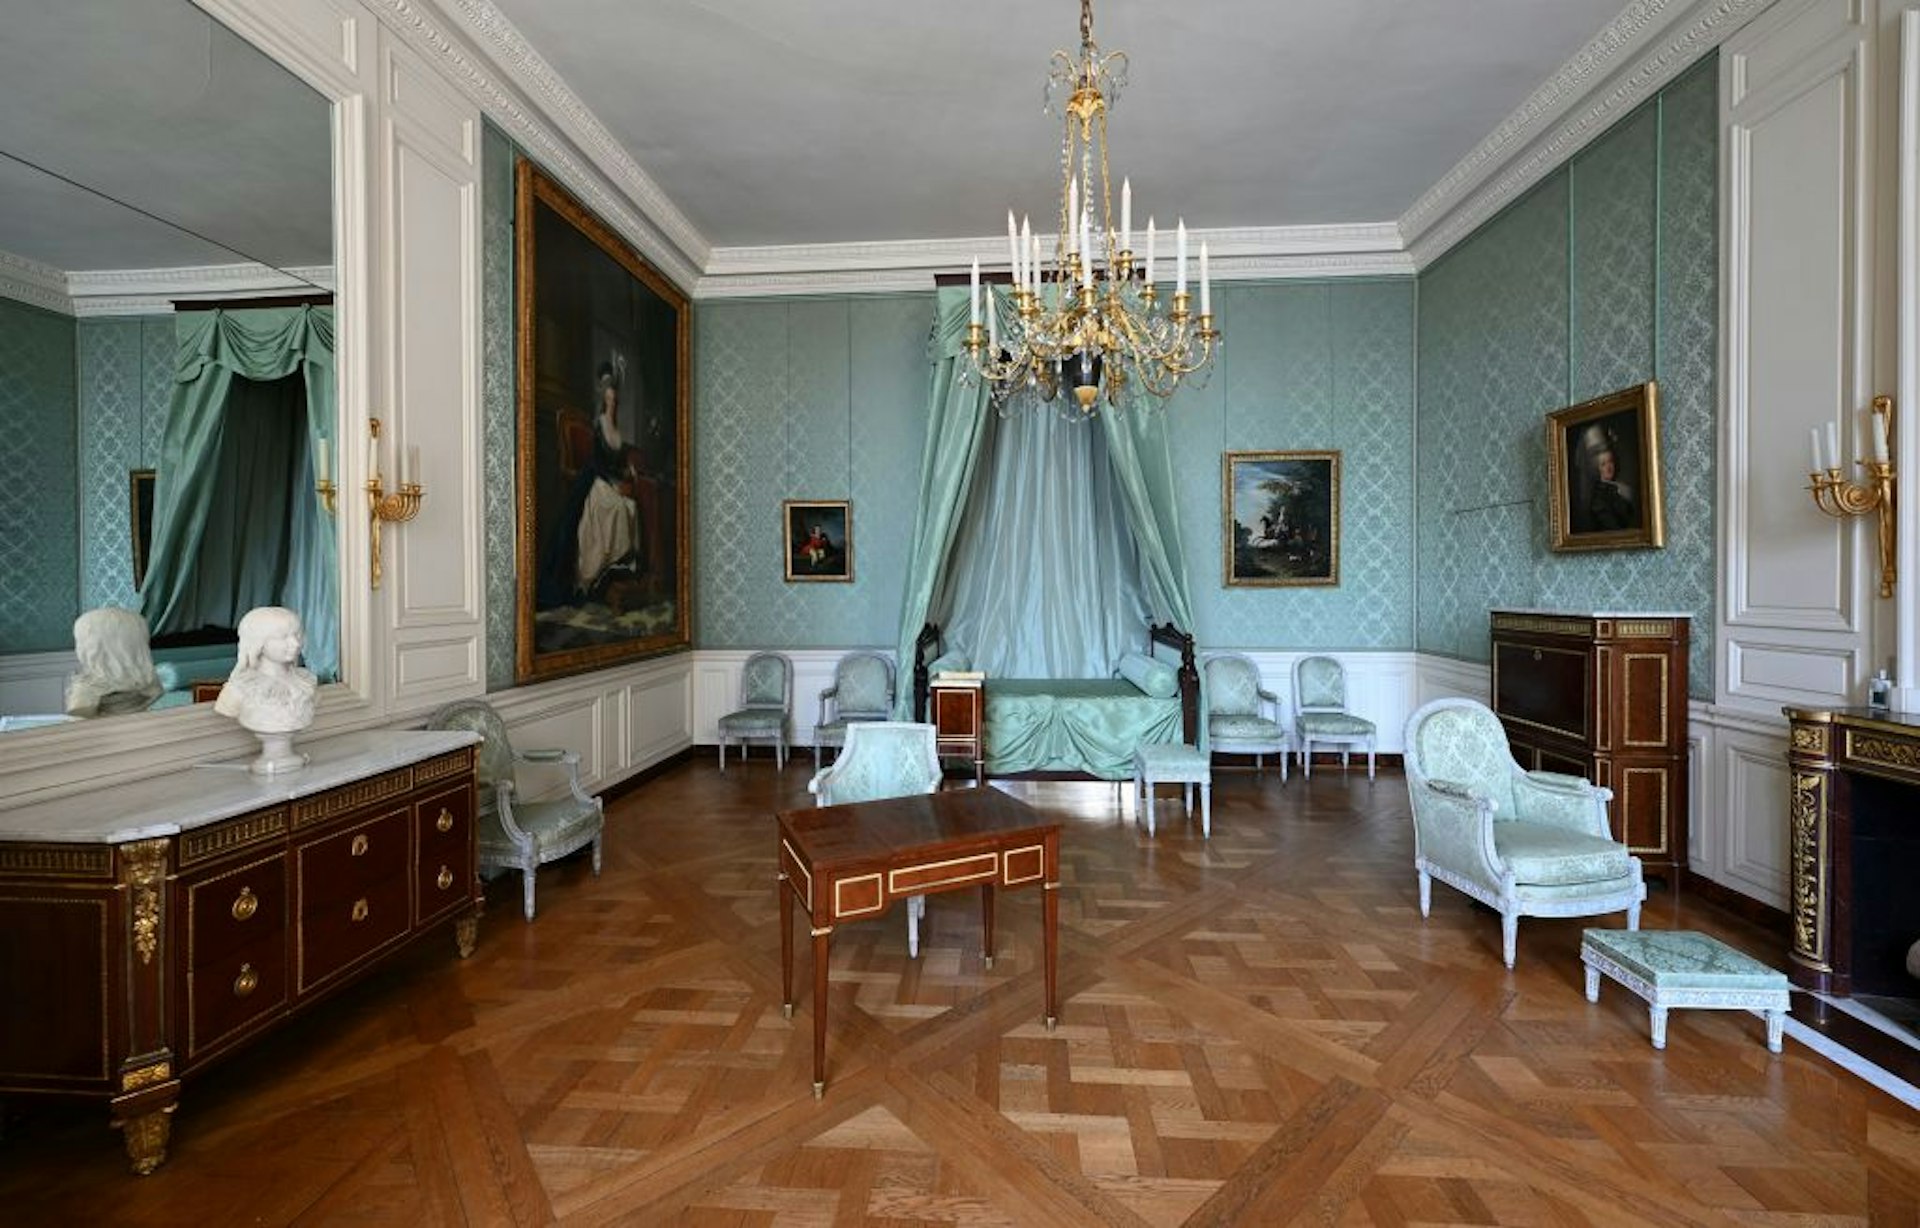 The small bedroom of Marie-Antoinette at the Palace of Versailles